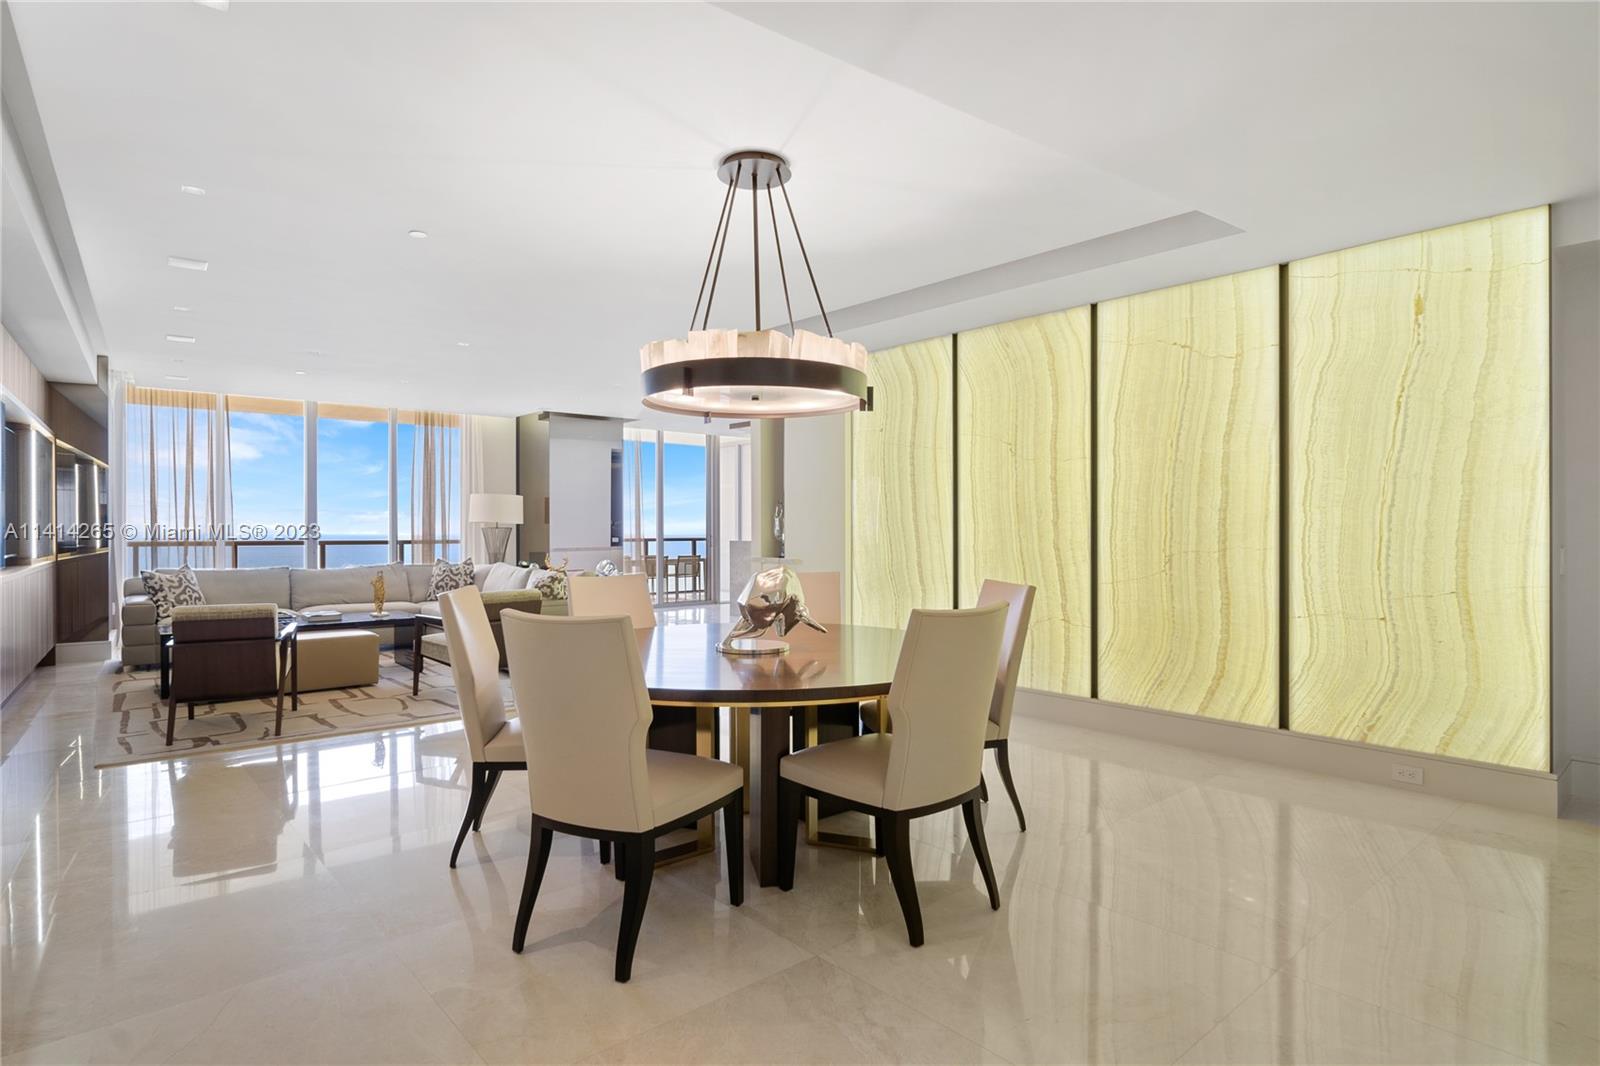 One of the kind turn-key unit! Three bedroom apartment 3.5 bath. Designer furnished and decorated throughout with: custom built-ins and cabinetry, automatic blinds, smart home system etc. The unit is in brand new condition since it was rarely ever occupied. Enjoy luxurious life style at this 5 star exclusive property at St Regis Bal Harbour.